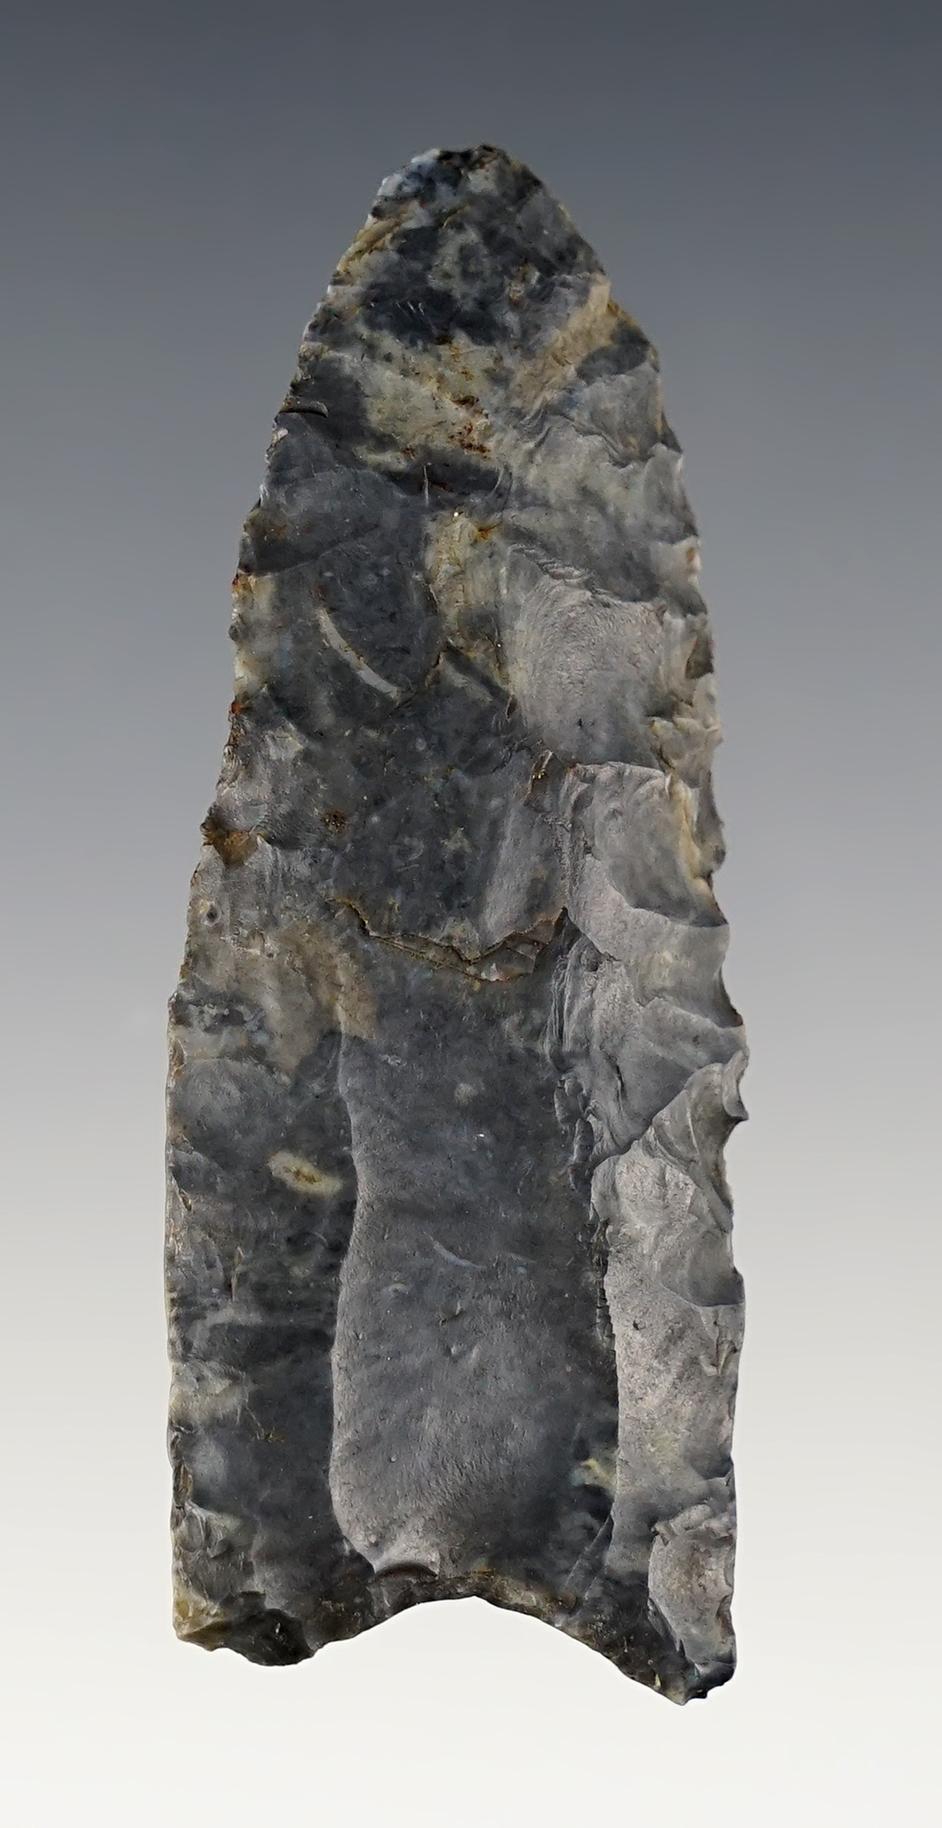 2 5/8" Fluted Paleo Clovis - Licking Co., Ohio. Classic style. Comes with a Dickey COA.